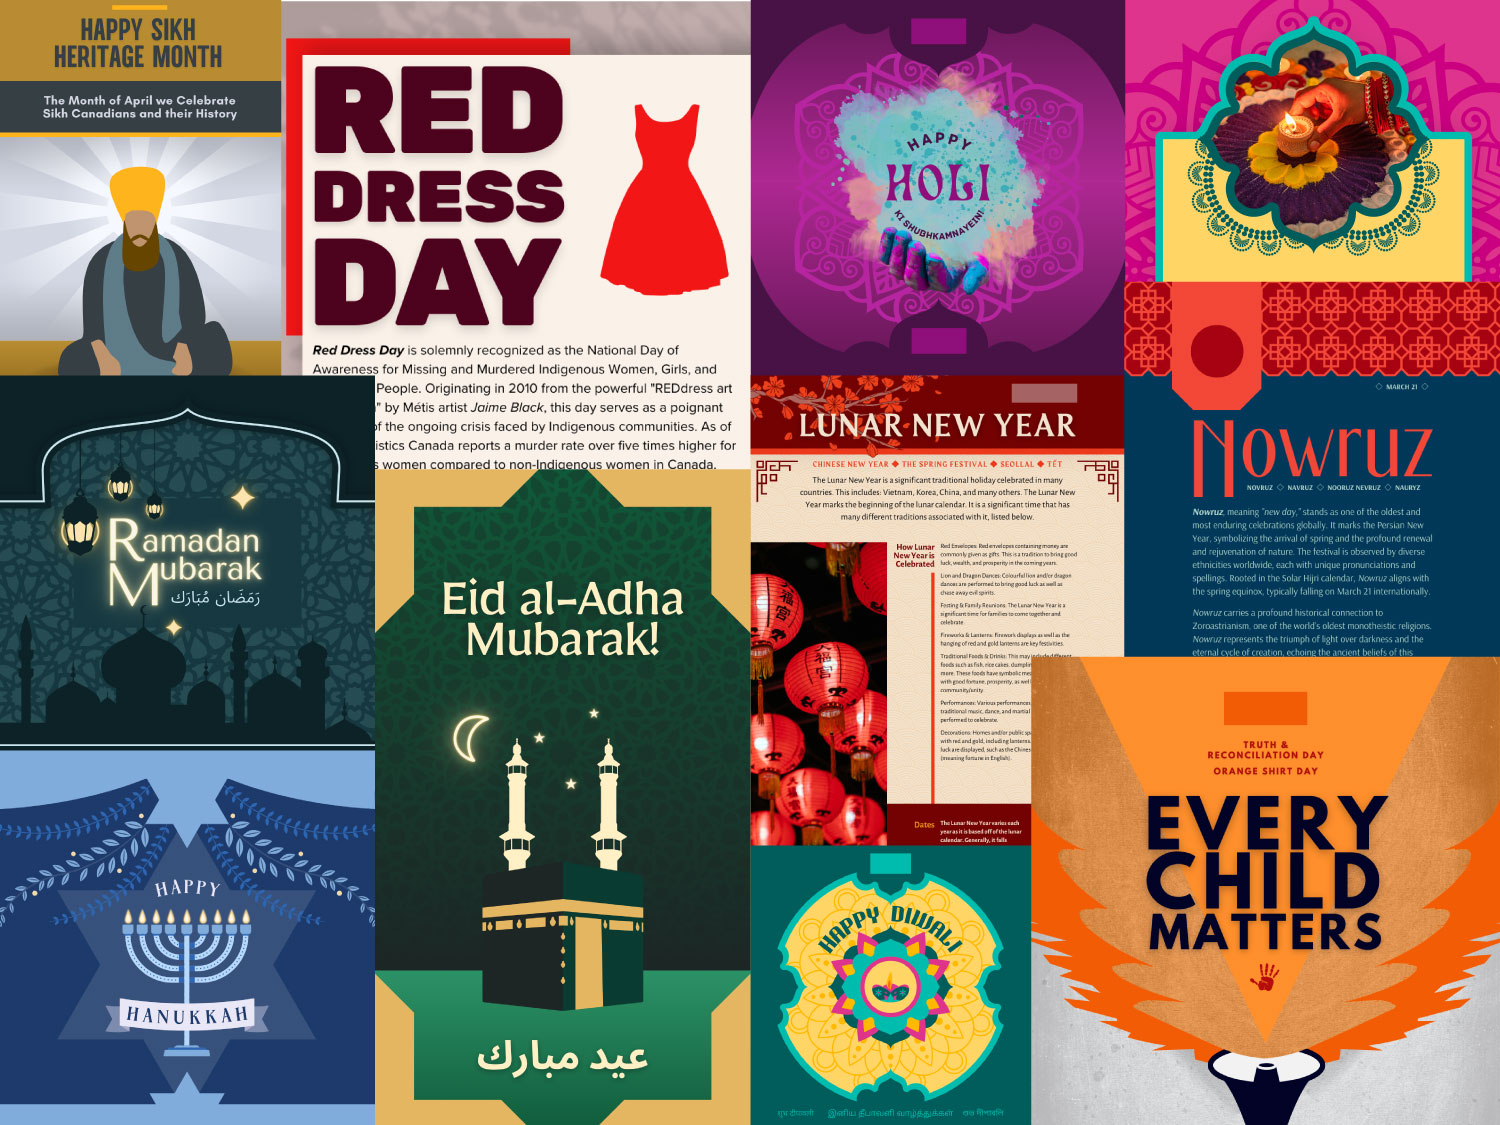 A bright and colourful poster highlights dates from the diversity calendar including Nowruz, Lunar New Year, Orange Shirt Day, Diwali, Red Dress Day, Sikh Heritage Month, Ramadan and Hanukkah.